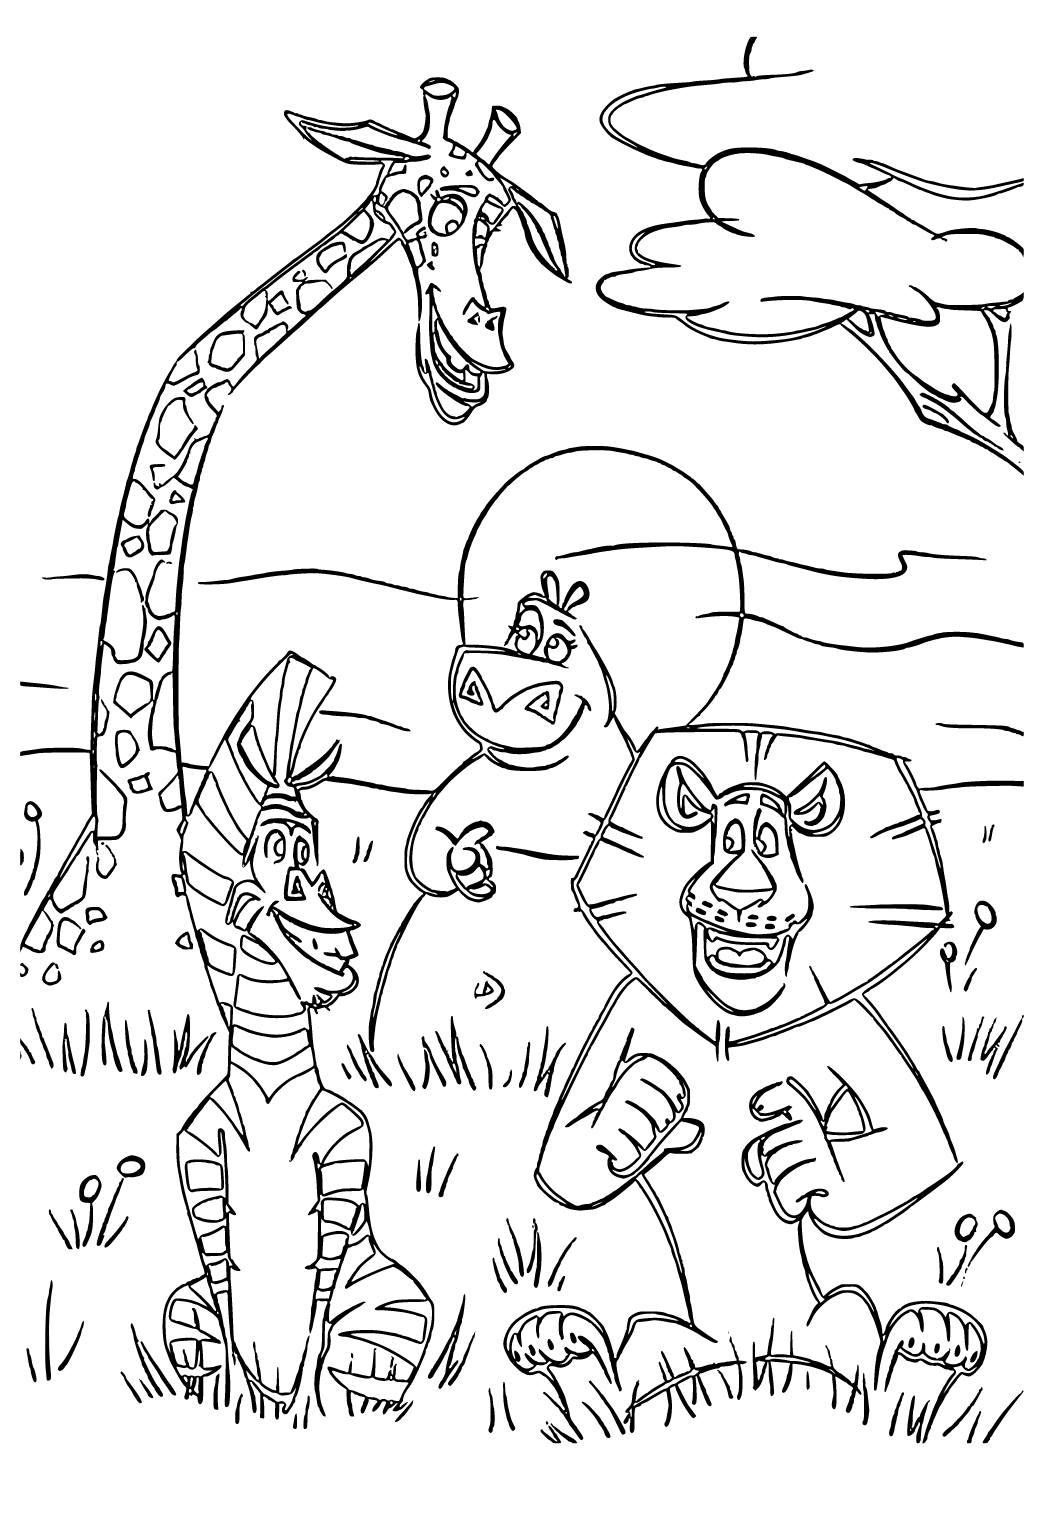 free-printable-madagascar-characters-coloring-page-for-adults-and-kids